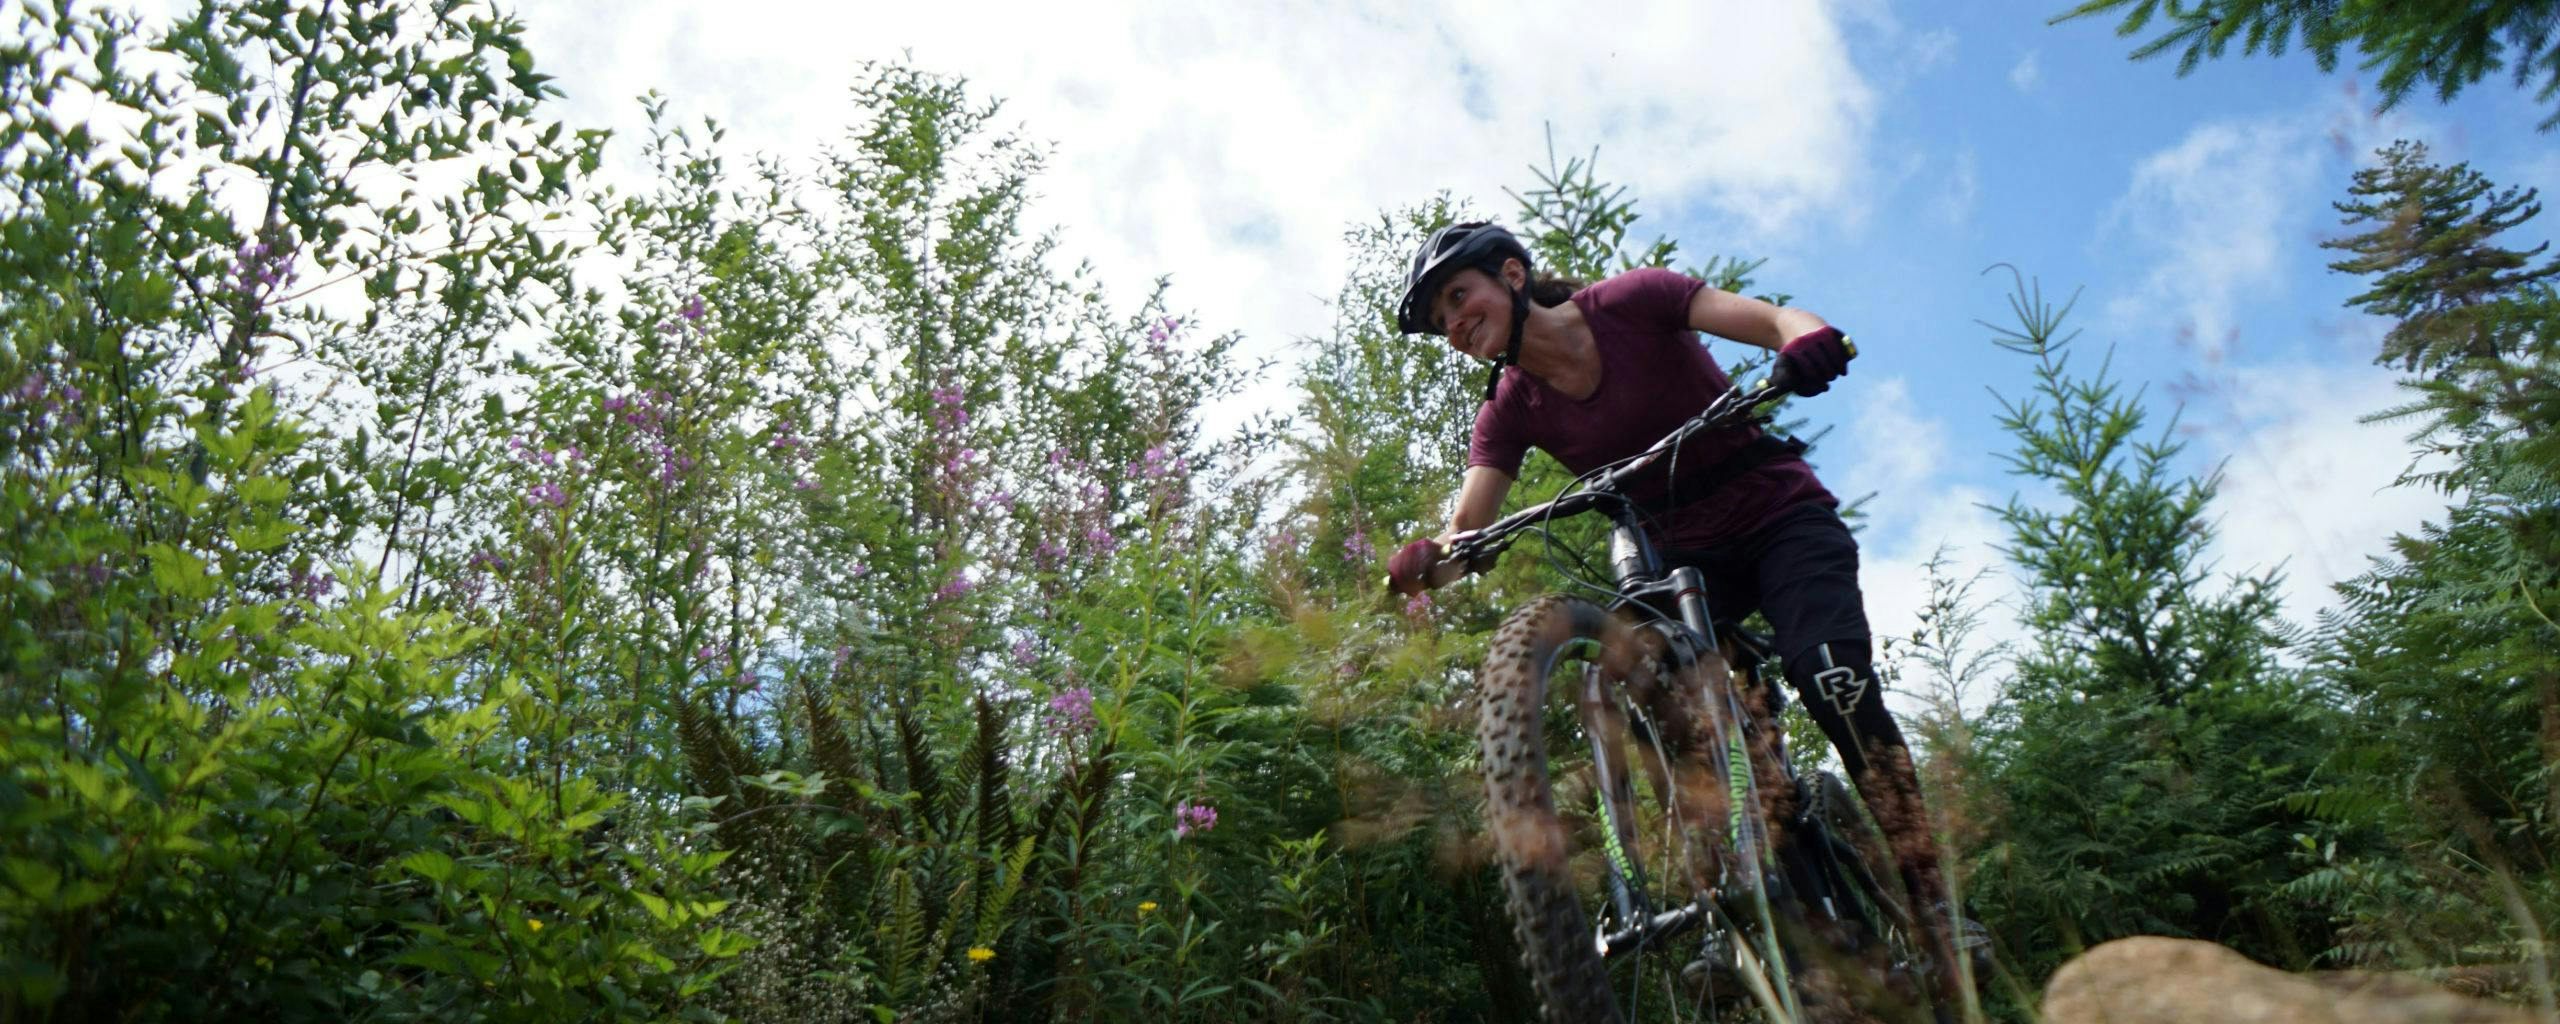 Mountain biker on a wooded trail